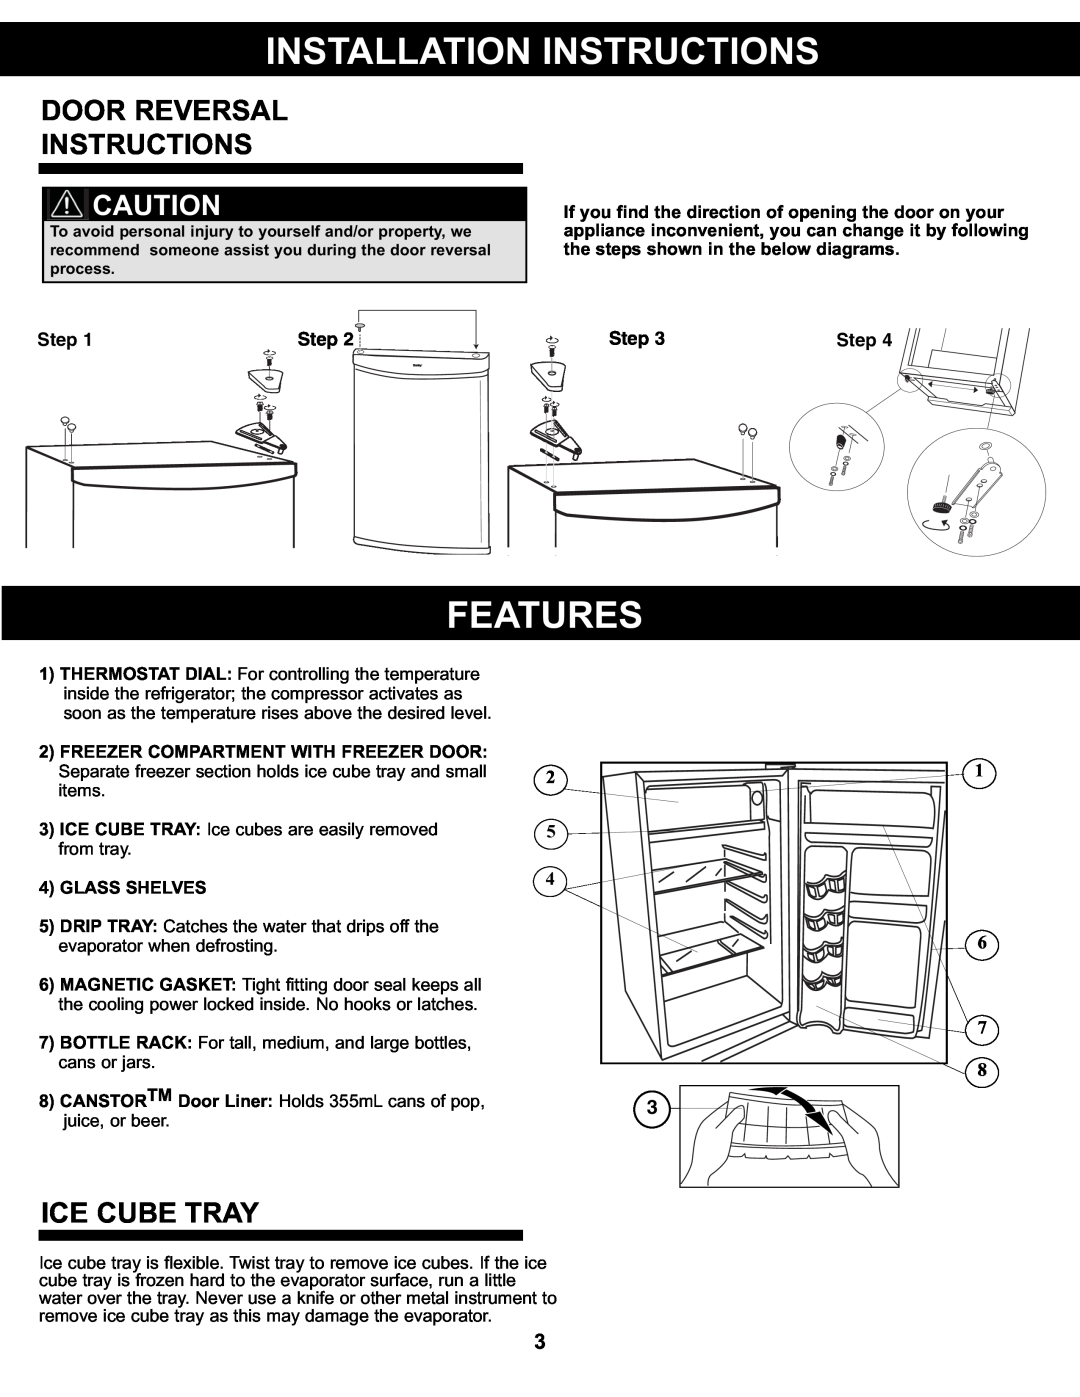 Sunbeam SBCR91BSL Features, Door Reversal Instructions, Ice Cube Tray, Step, 4GLASS SHELVES, Installation Instructions 